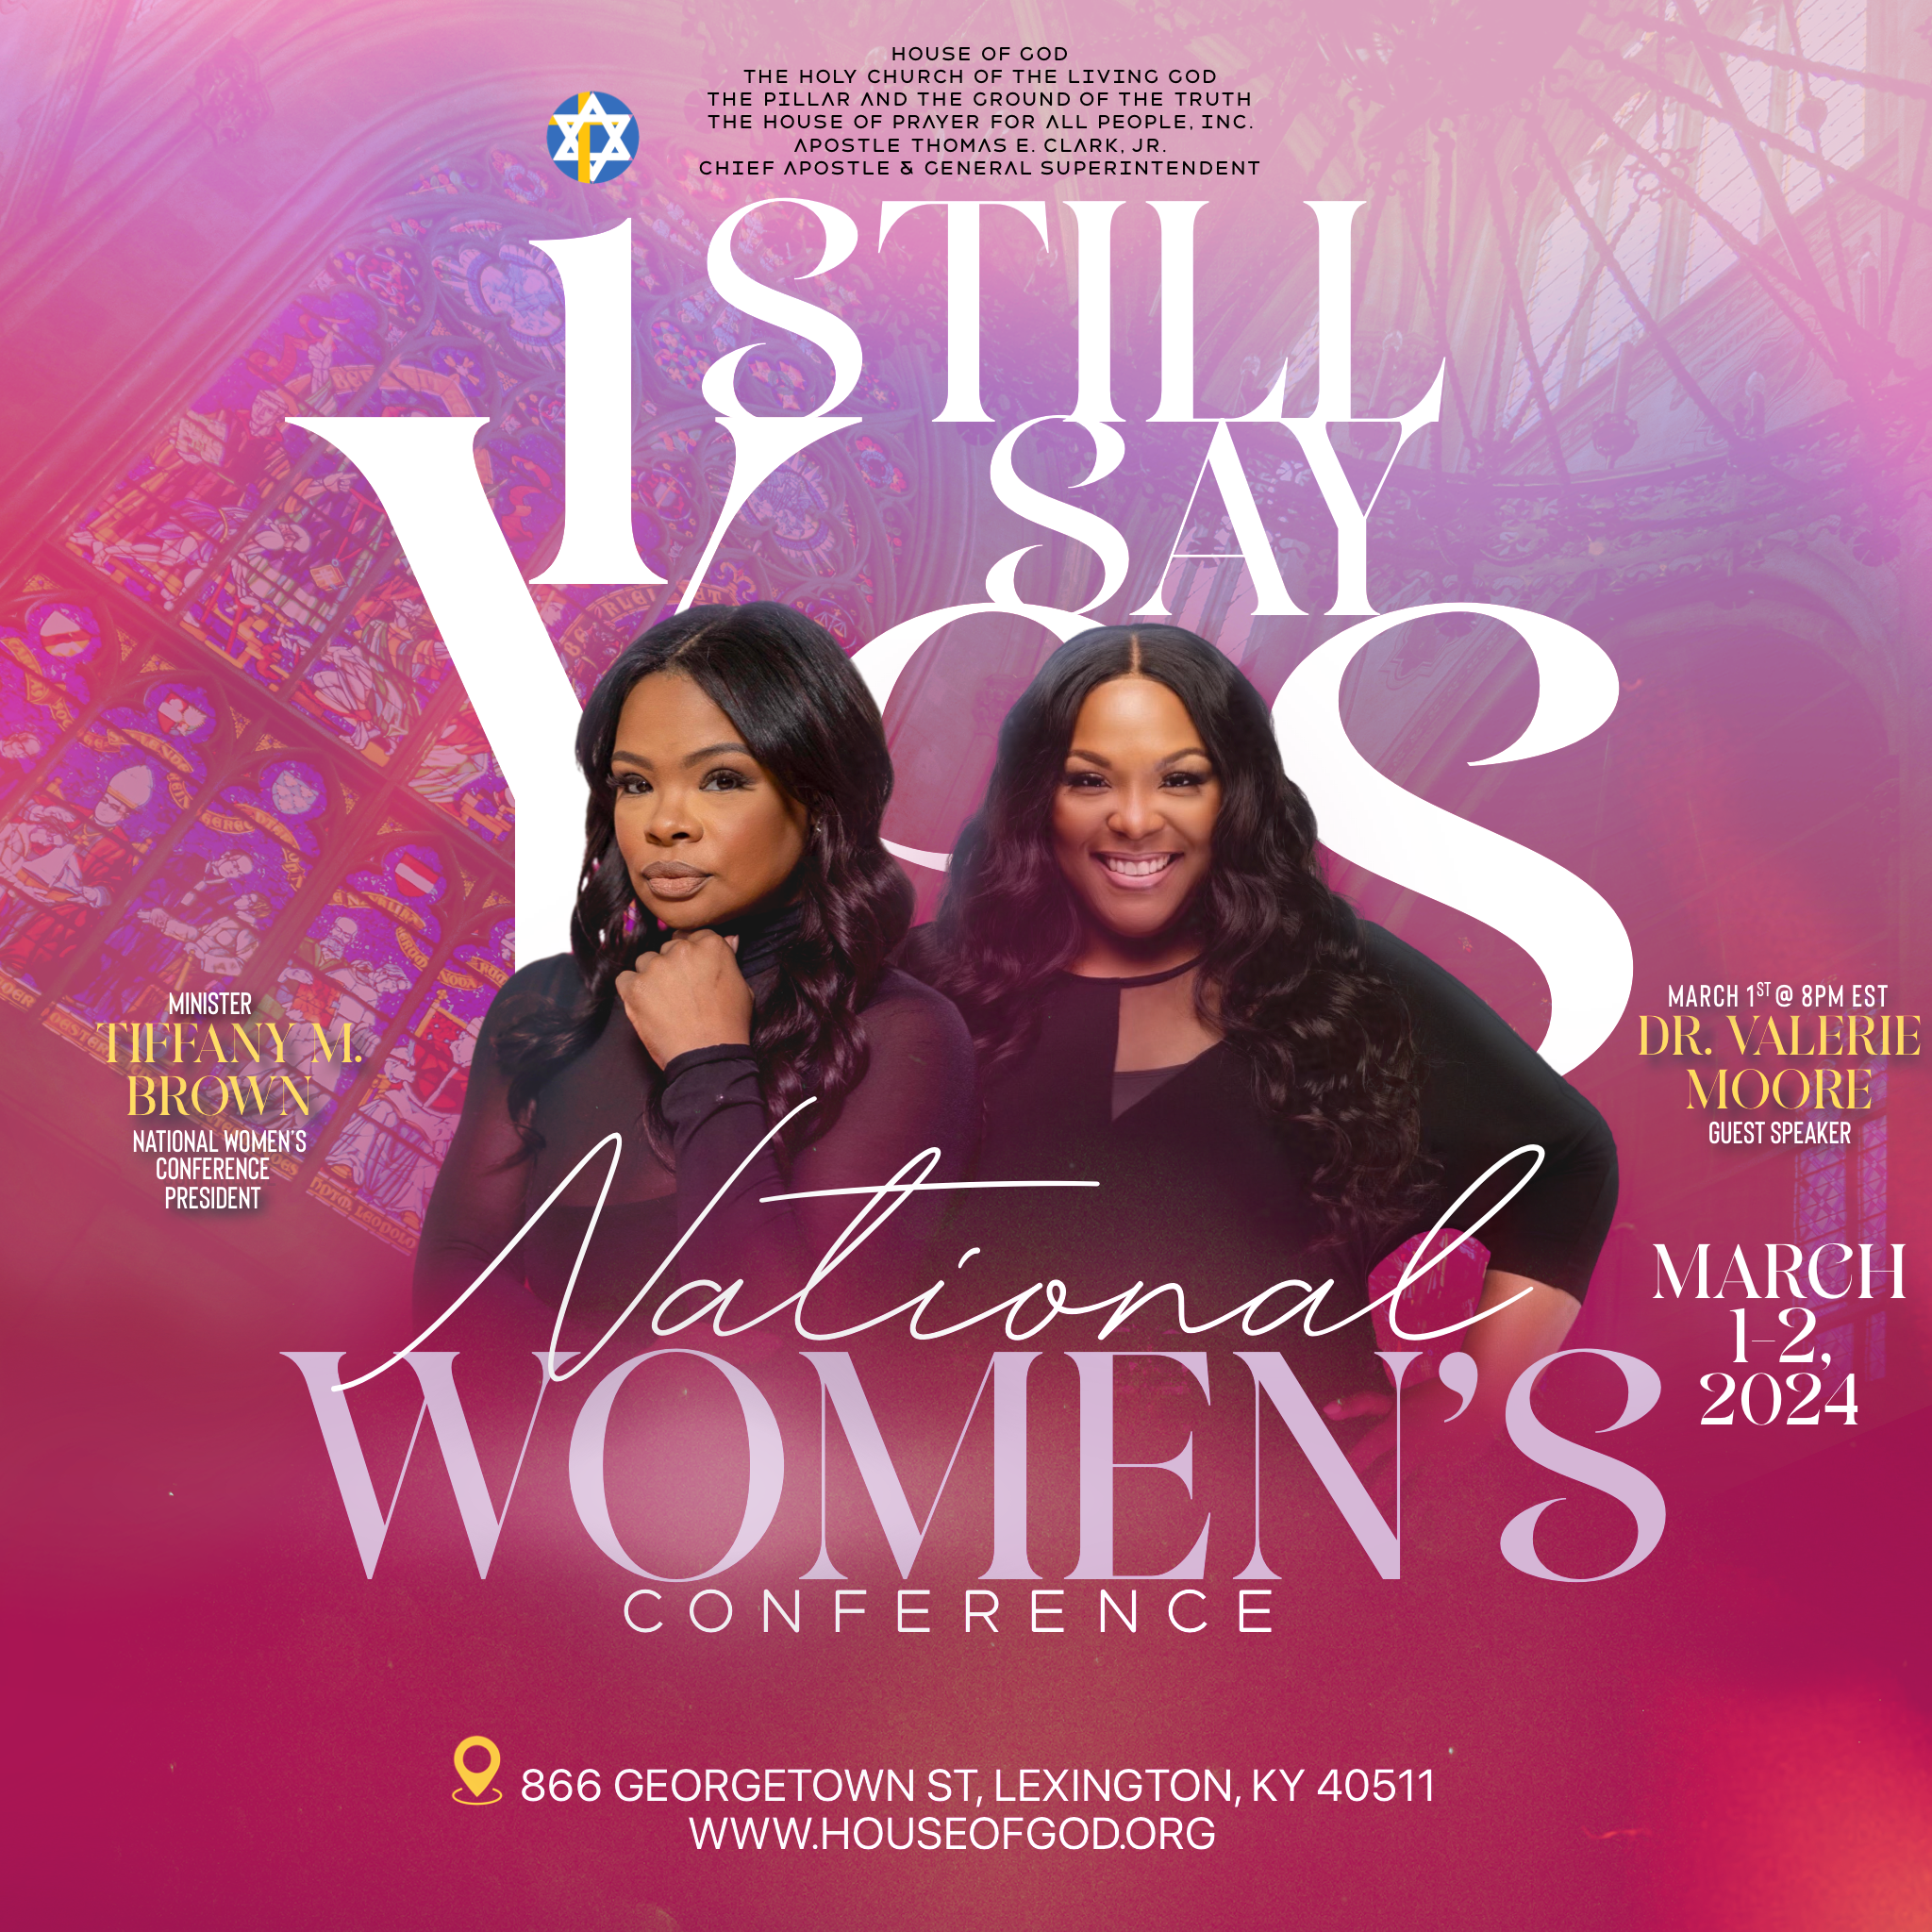 National Women’s Conference – March 1-2, 2024